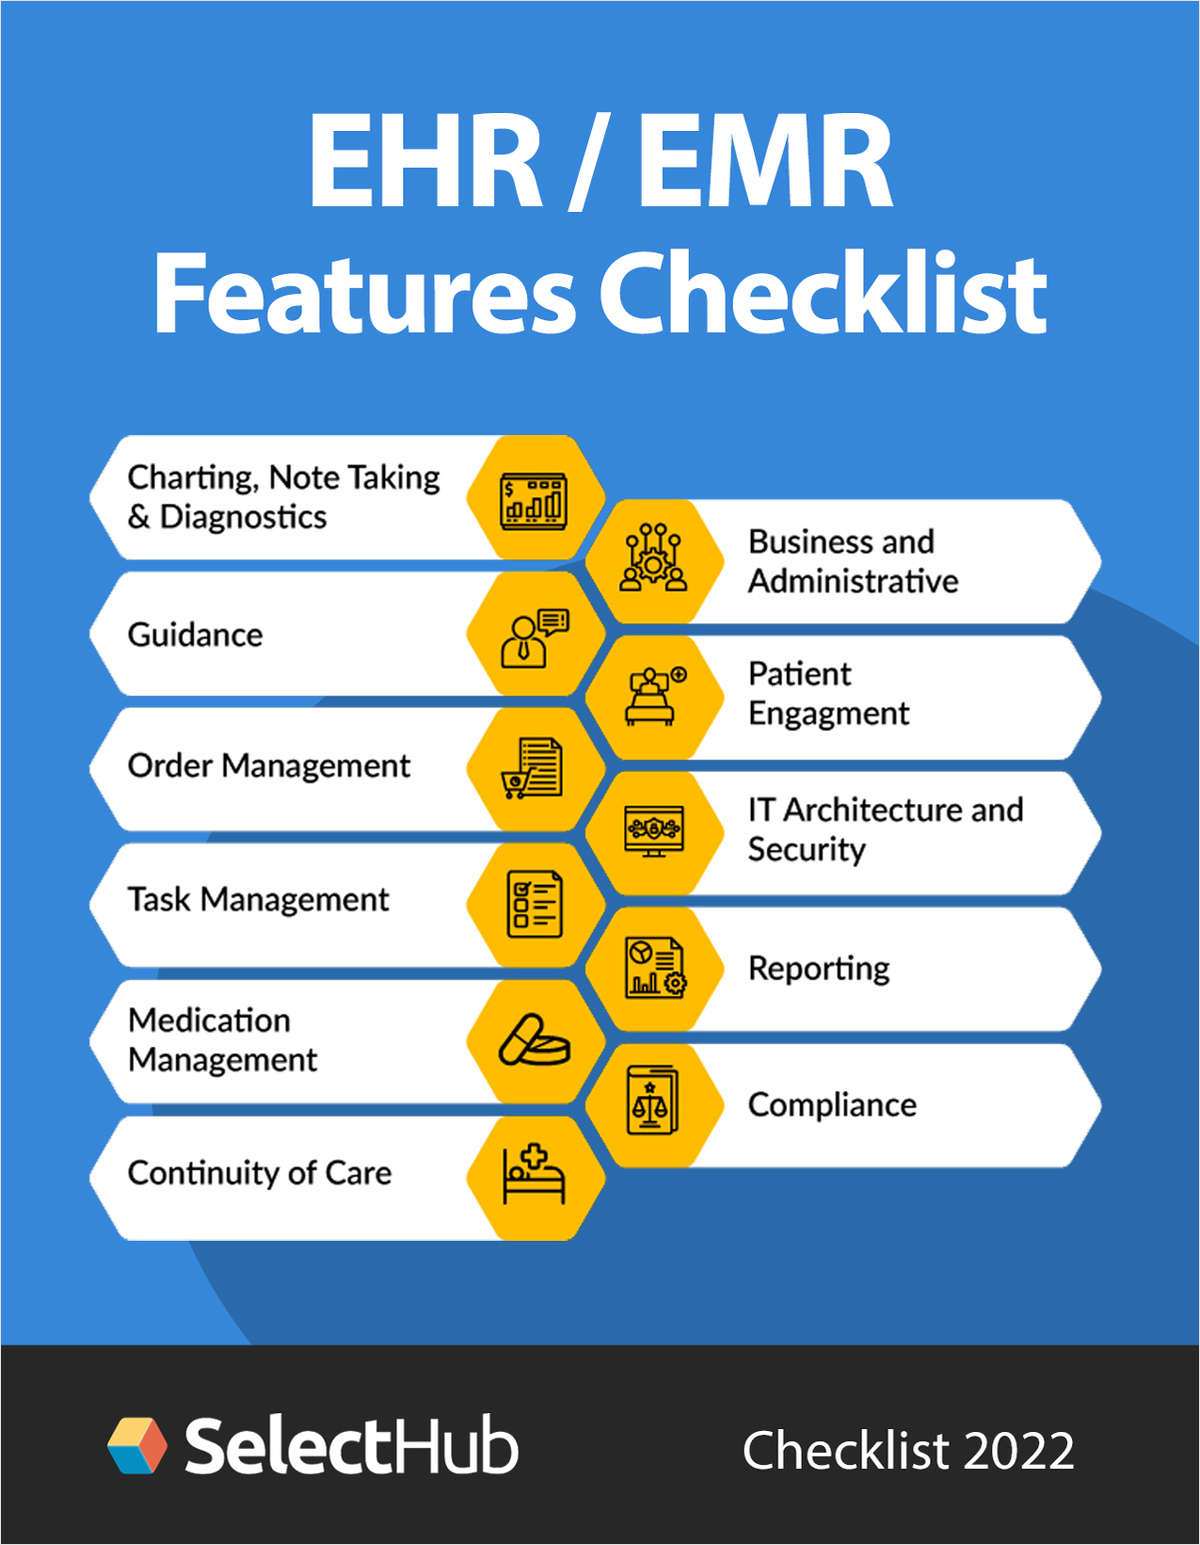 Expert EHR/EMR Clinical Features Checklist to Choose a New System